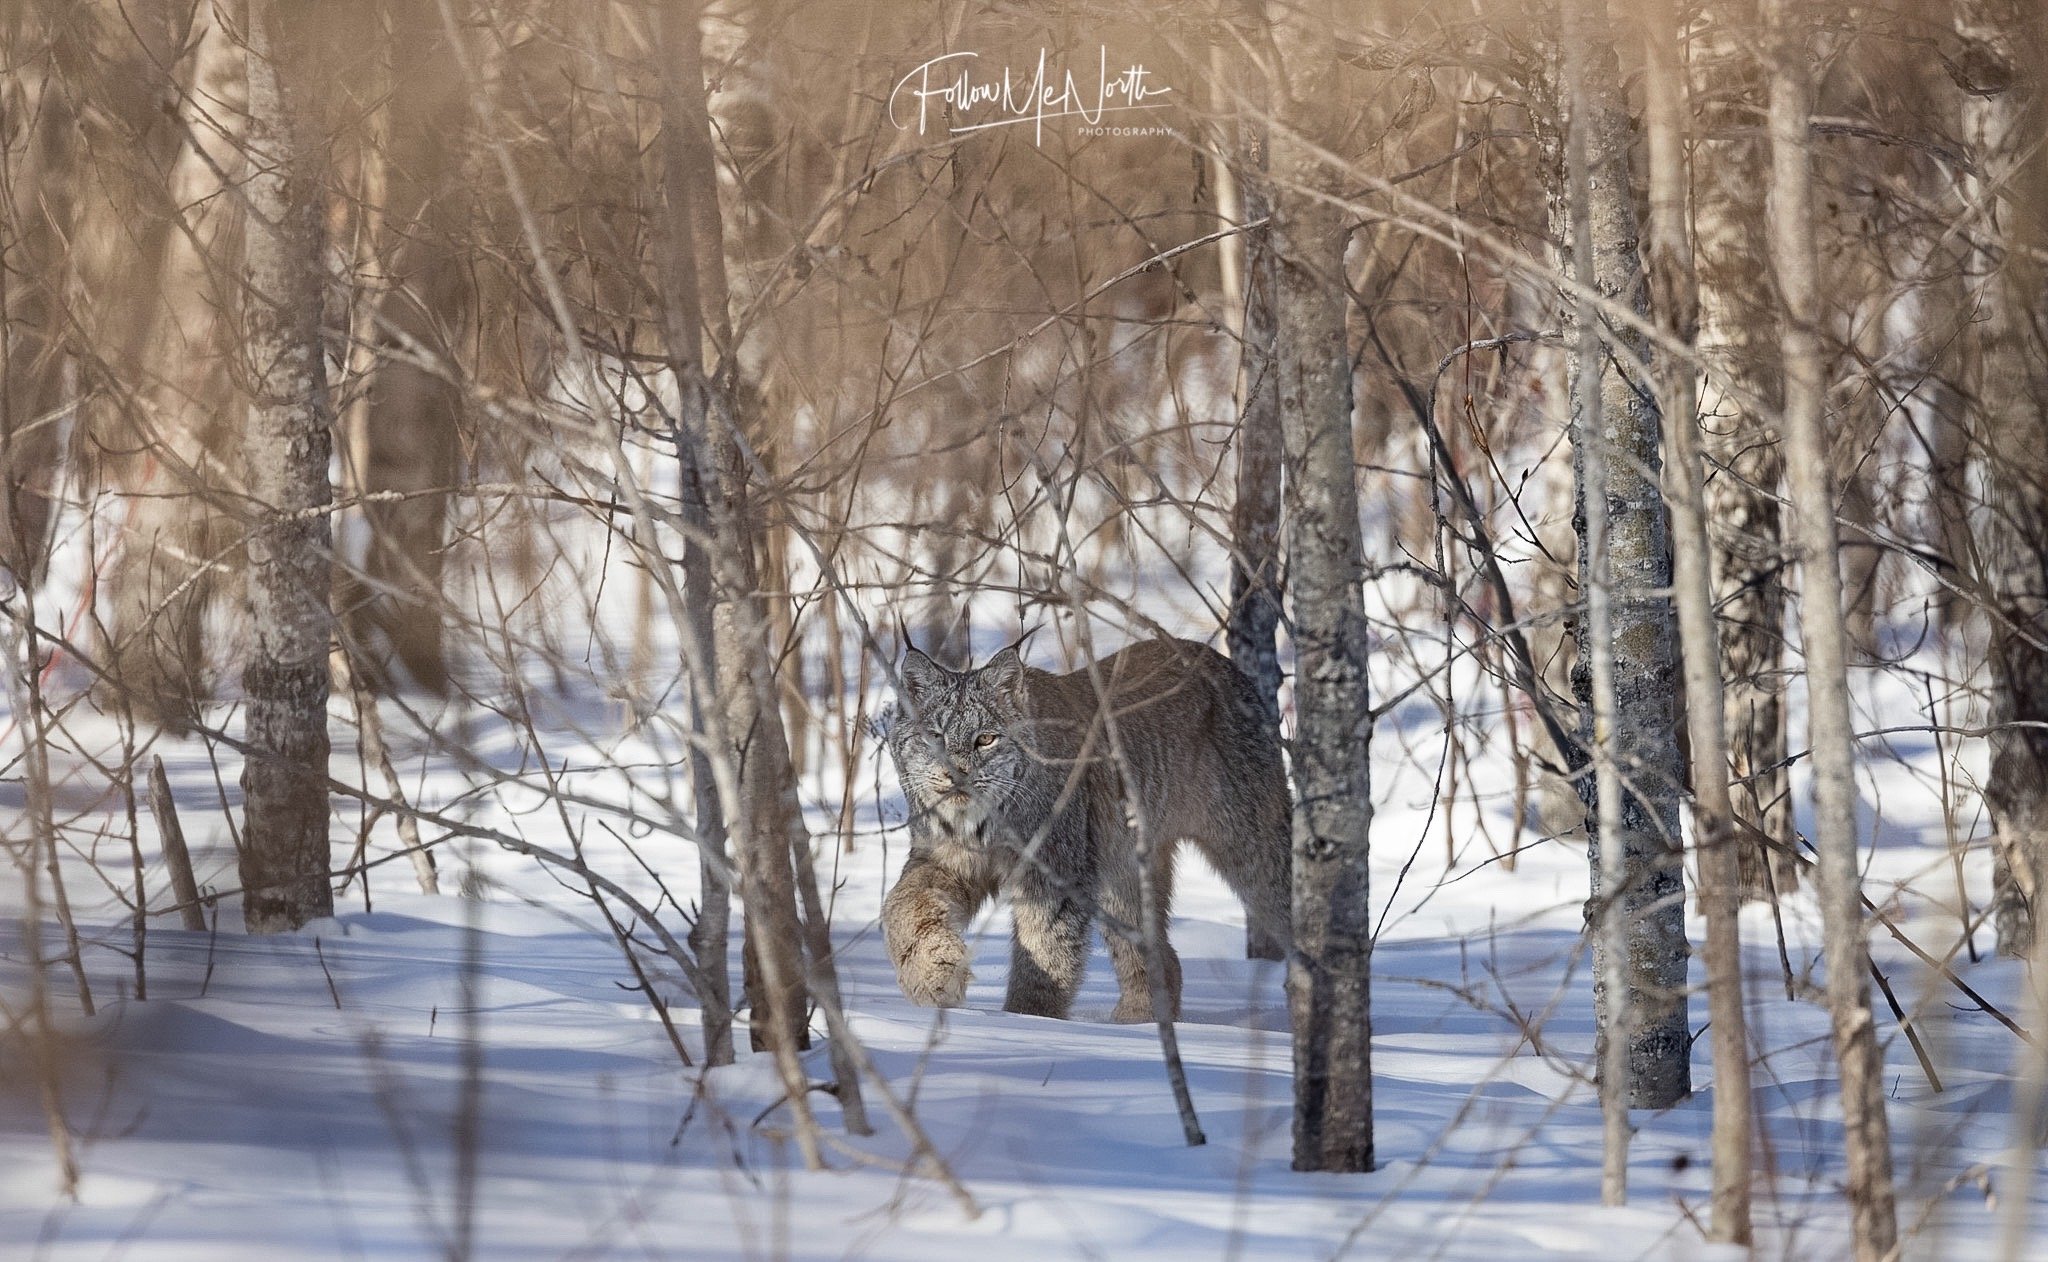 Canadian lynx: clever specialized hunters of the snowy forests